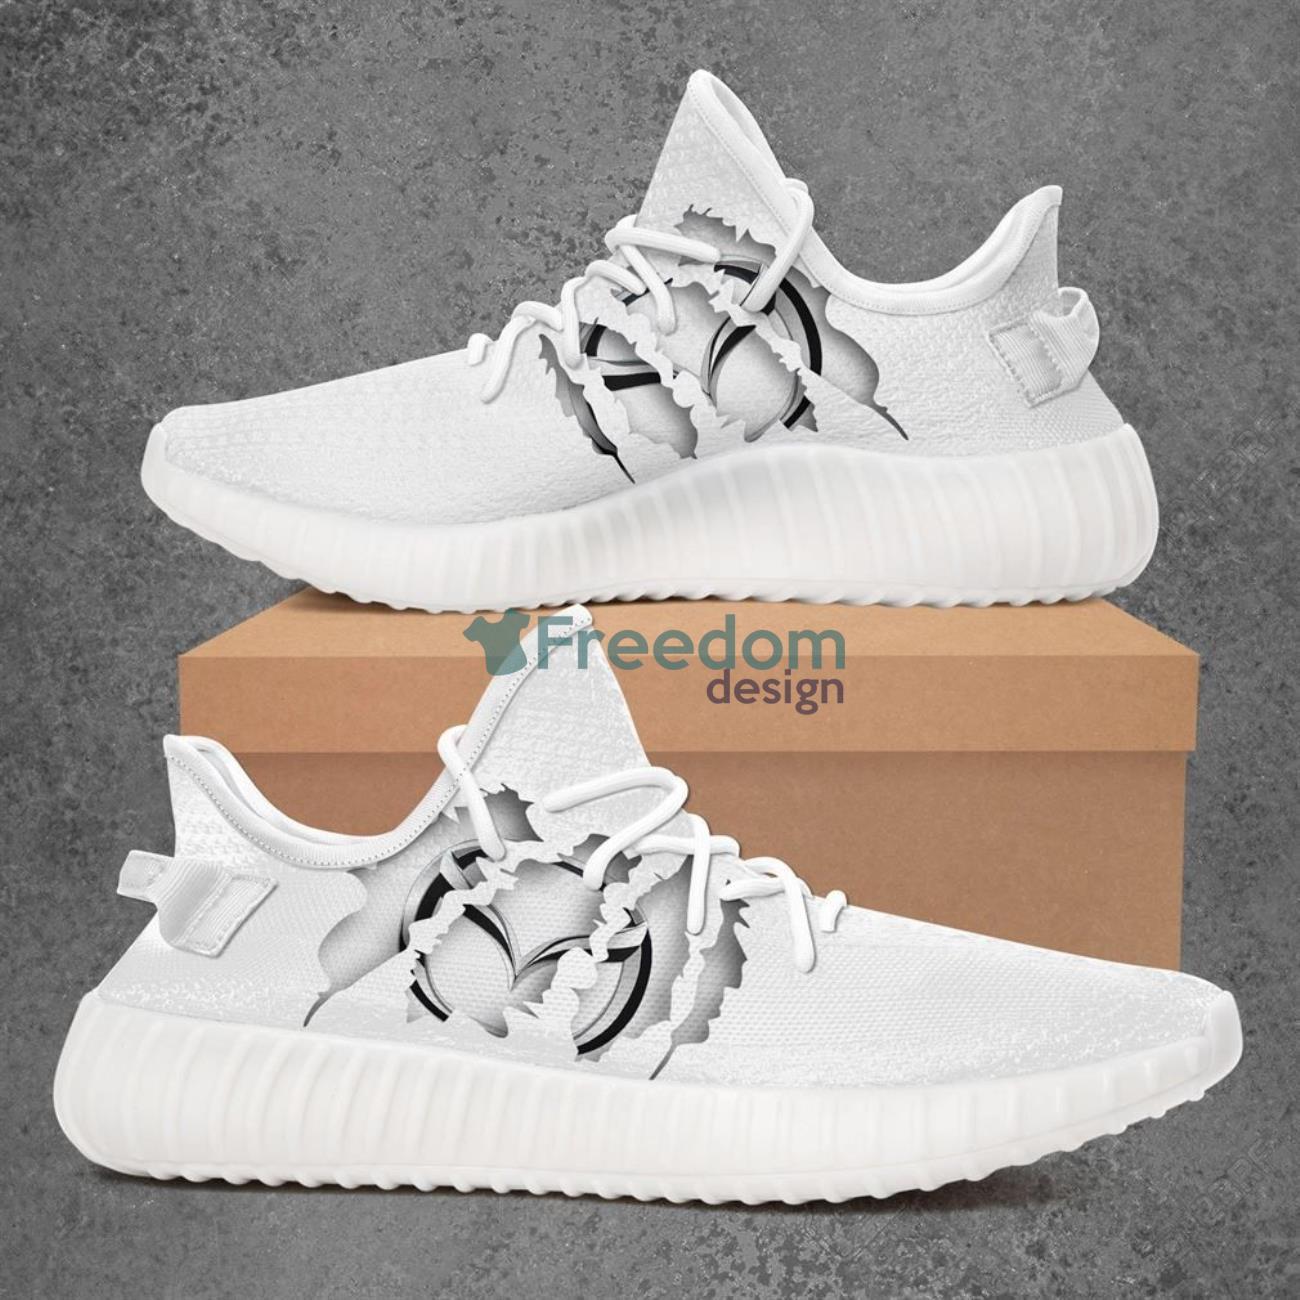 Mazda Car Yeezy White Shoes Sport Sneakers